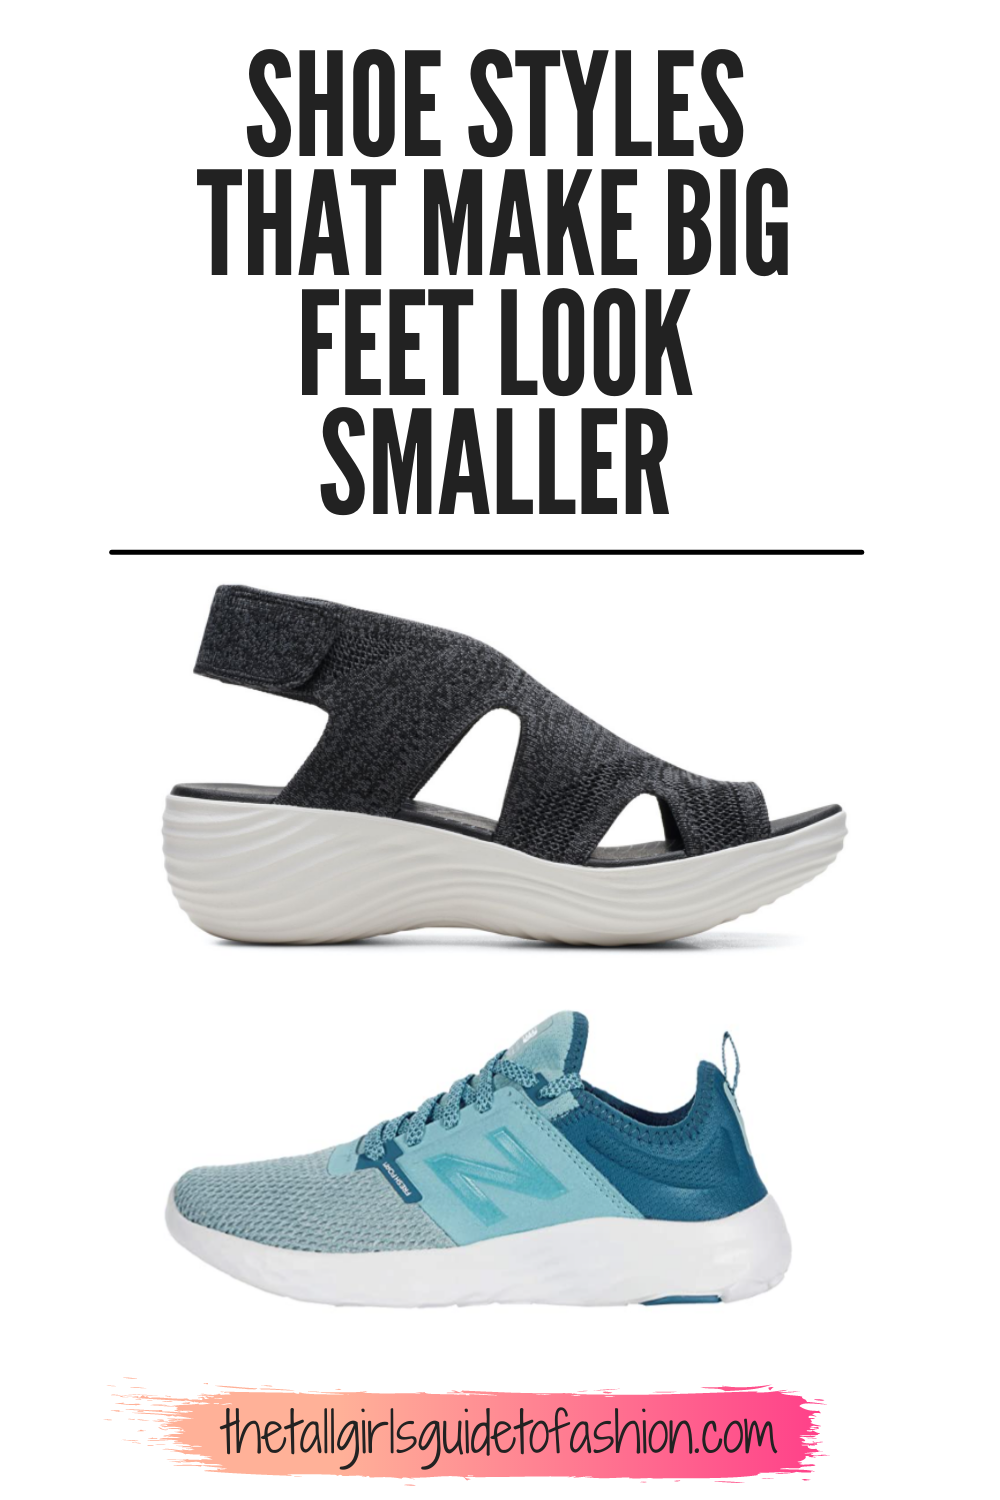 7 Types of Shoes to Make Your Legs Look Slimmer / Bright Side